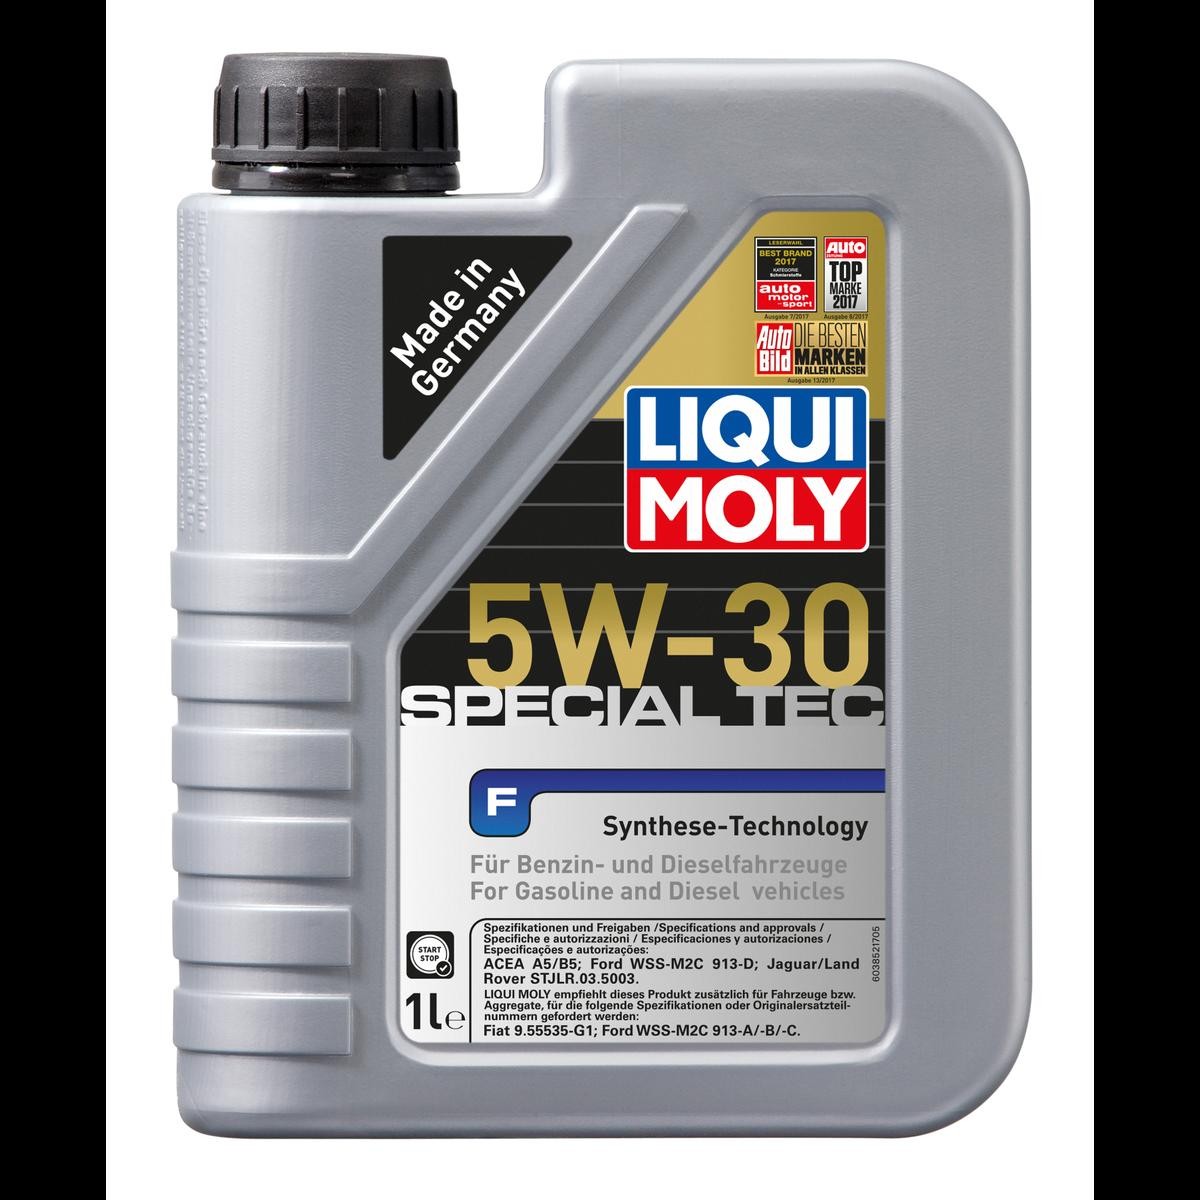 Renault Engine oil LIQUI MOLY 3852 at a good price